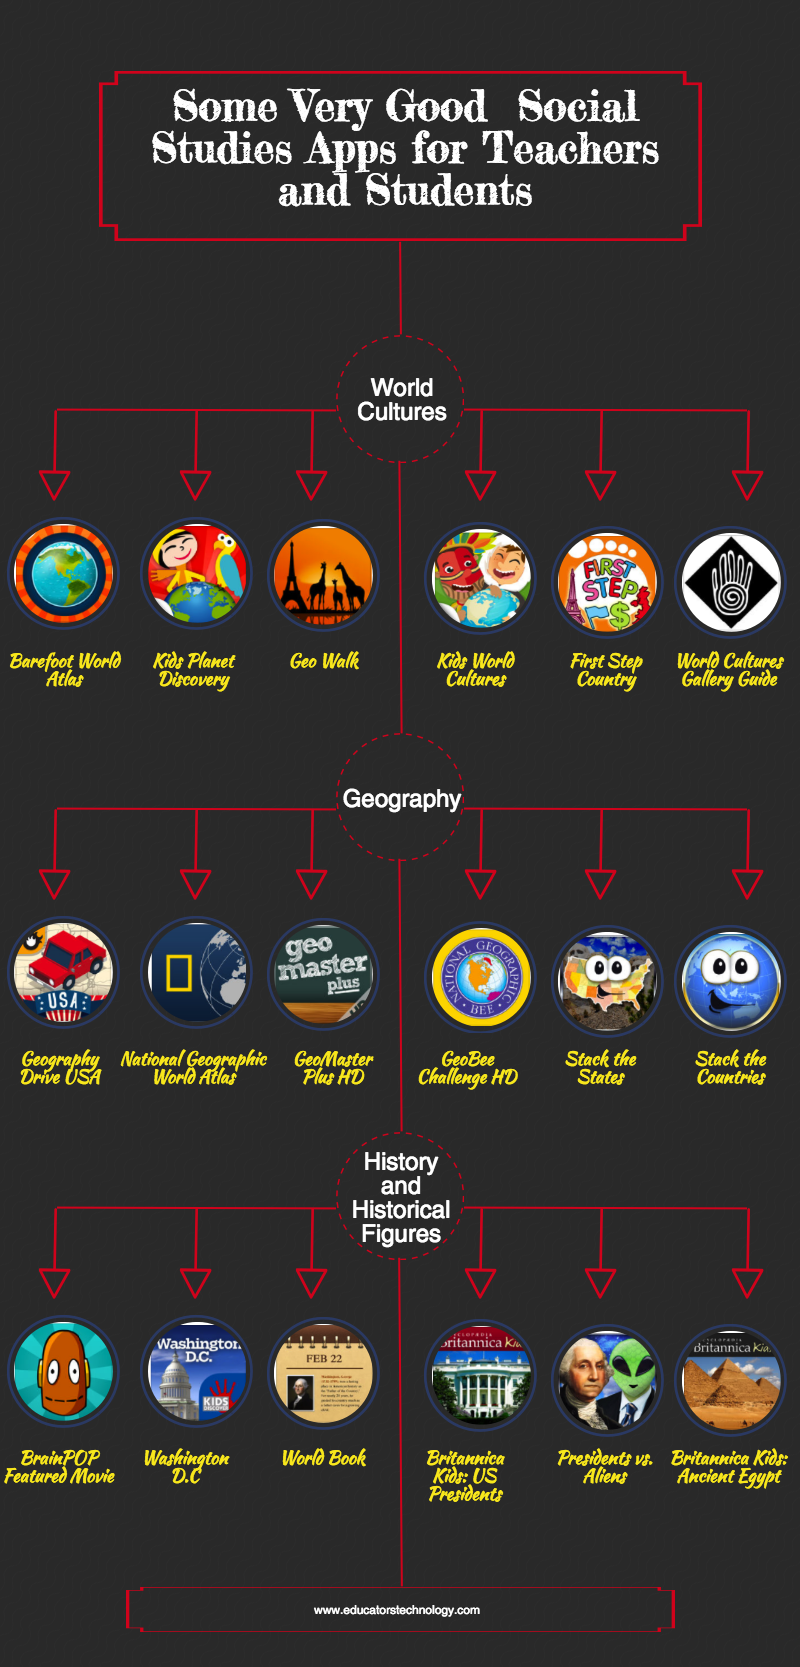 Below is a collection of to a greater extent than or less really skillful apps to purpose inwards your social studies shape Learn And Watch Some Helpful Social Studies Apps for Teachers in addition to Students